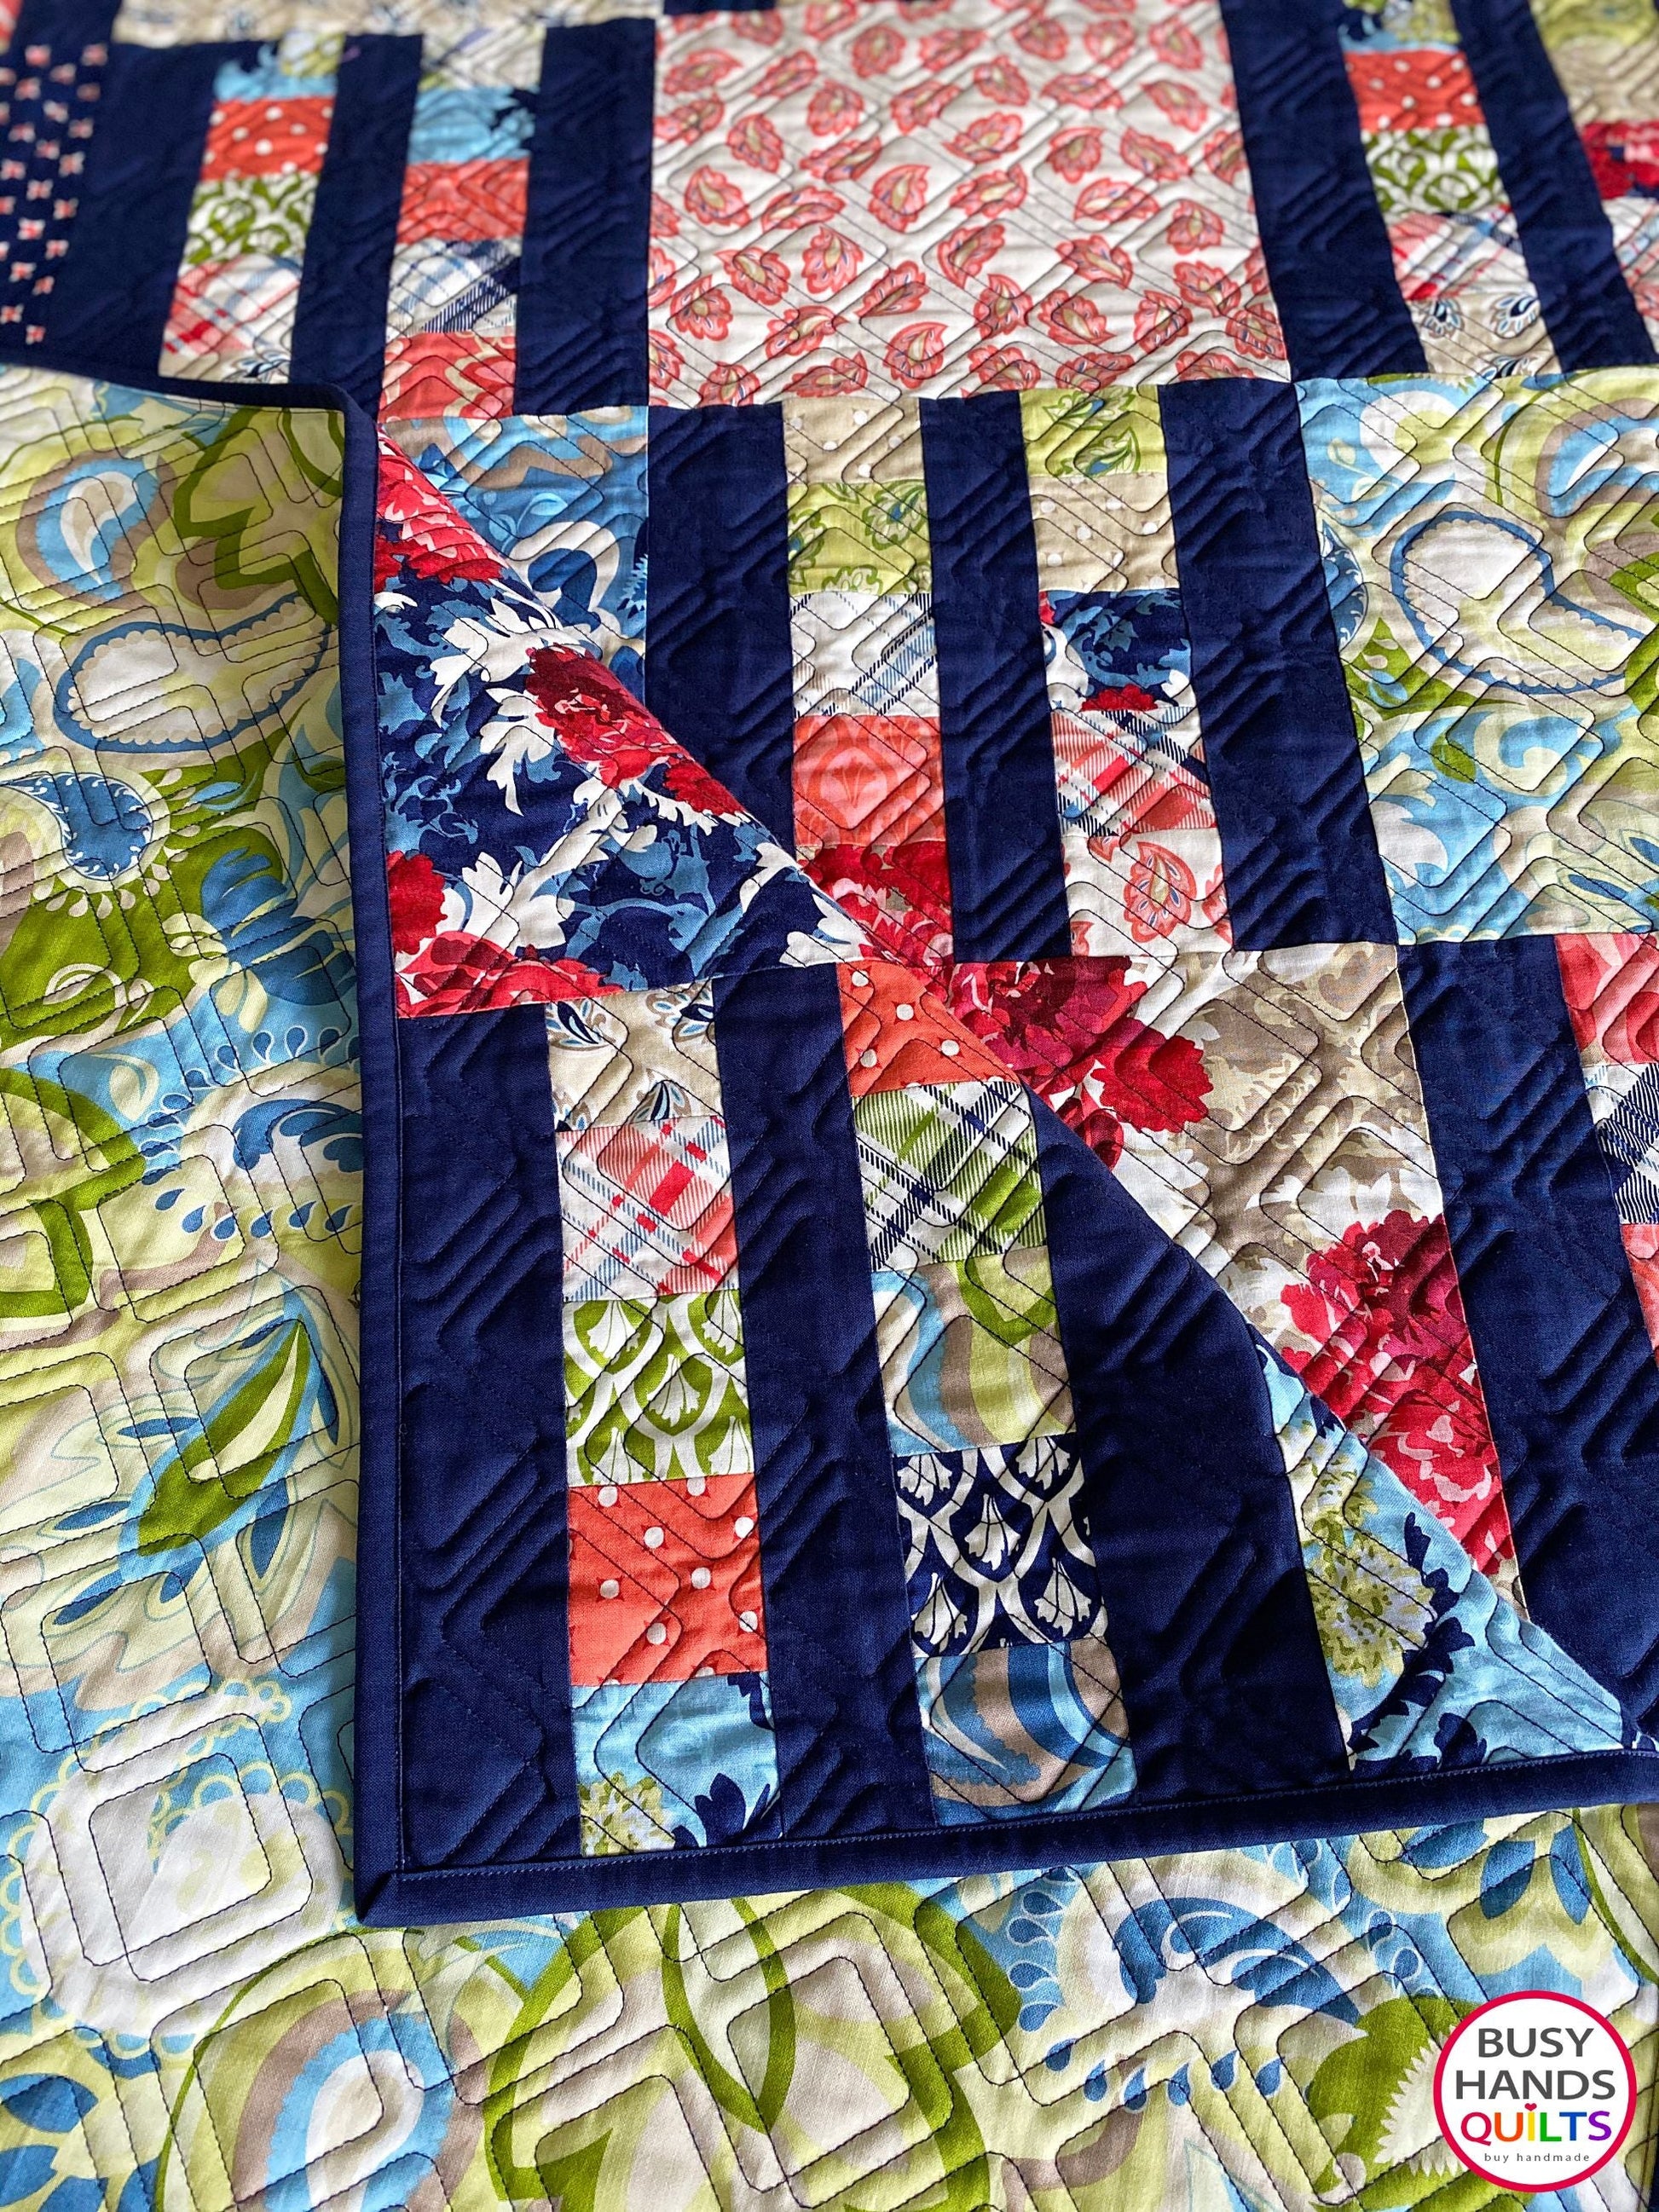 Handmade Picket Fence Rectangular Throw Quilt in Vintage Verona Busy Hands Quilts $289